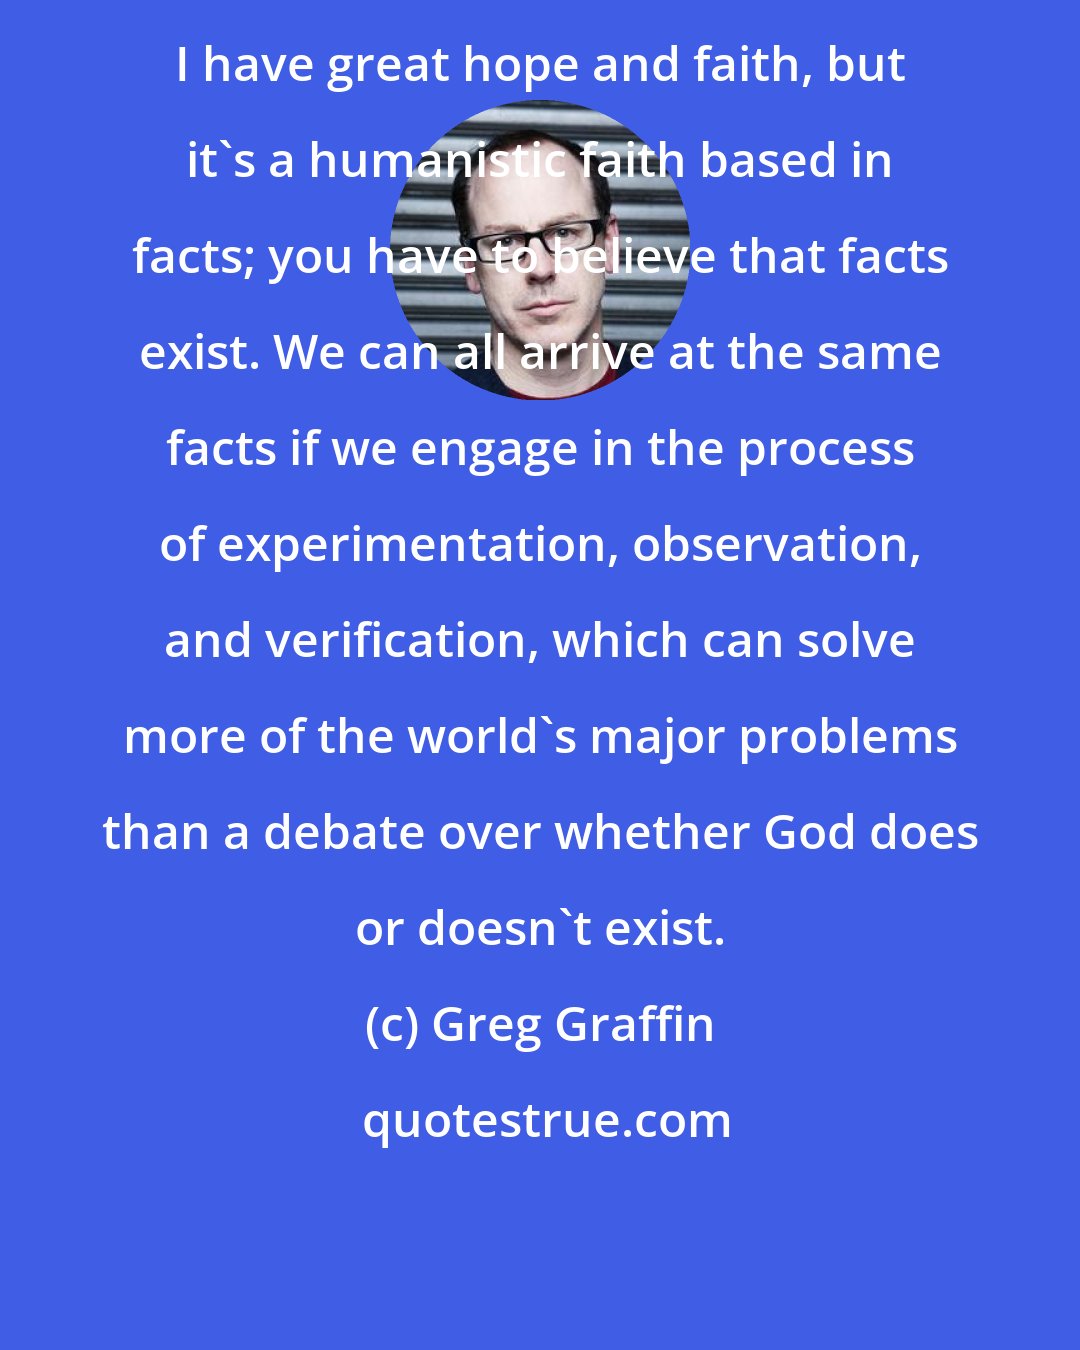 Greg Graffin: I have great hope and faith, but it's a humanistic faith based in facts; you have to believe that facts exist. We can all arrive at the same facts if we engage in the process of experimentation, observation, and verification, which can solve more of the world's major problems than a debate over whether God does or doesn't exist.